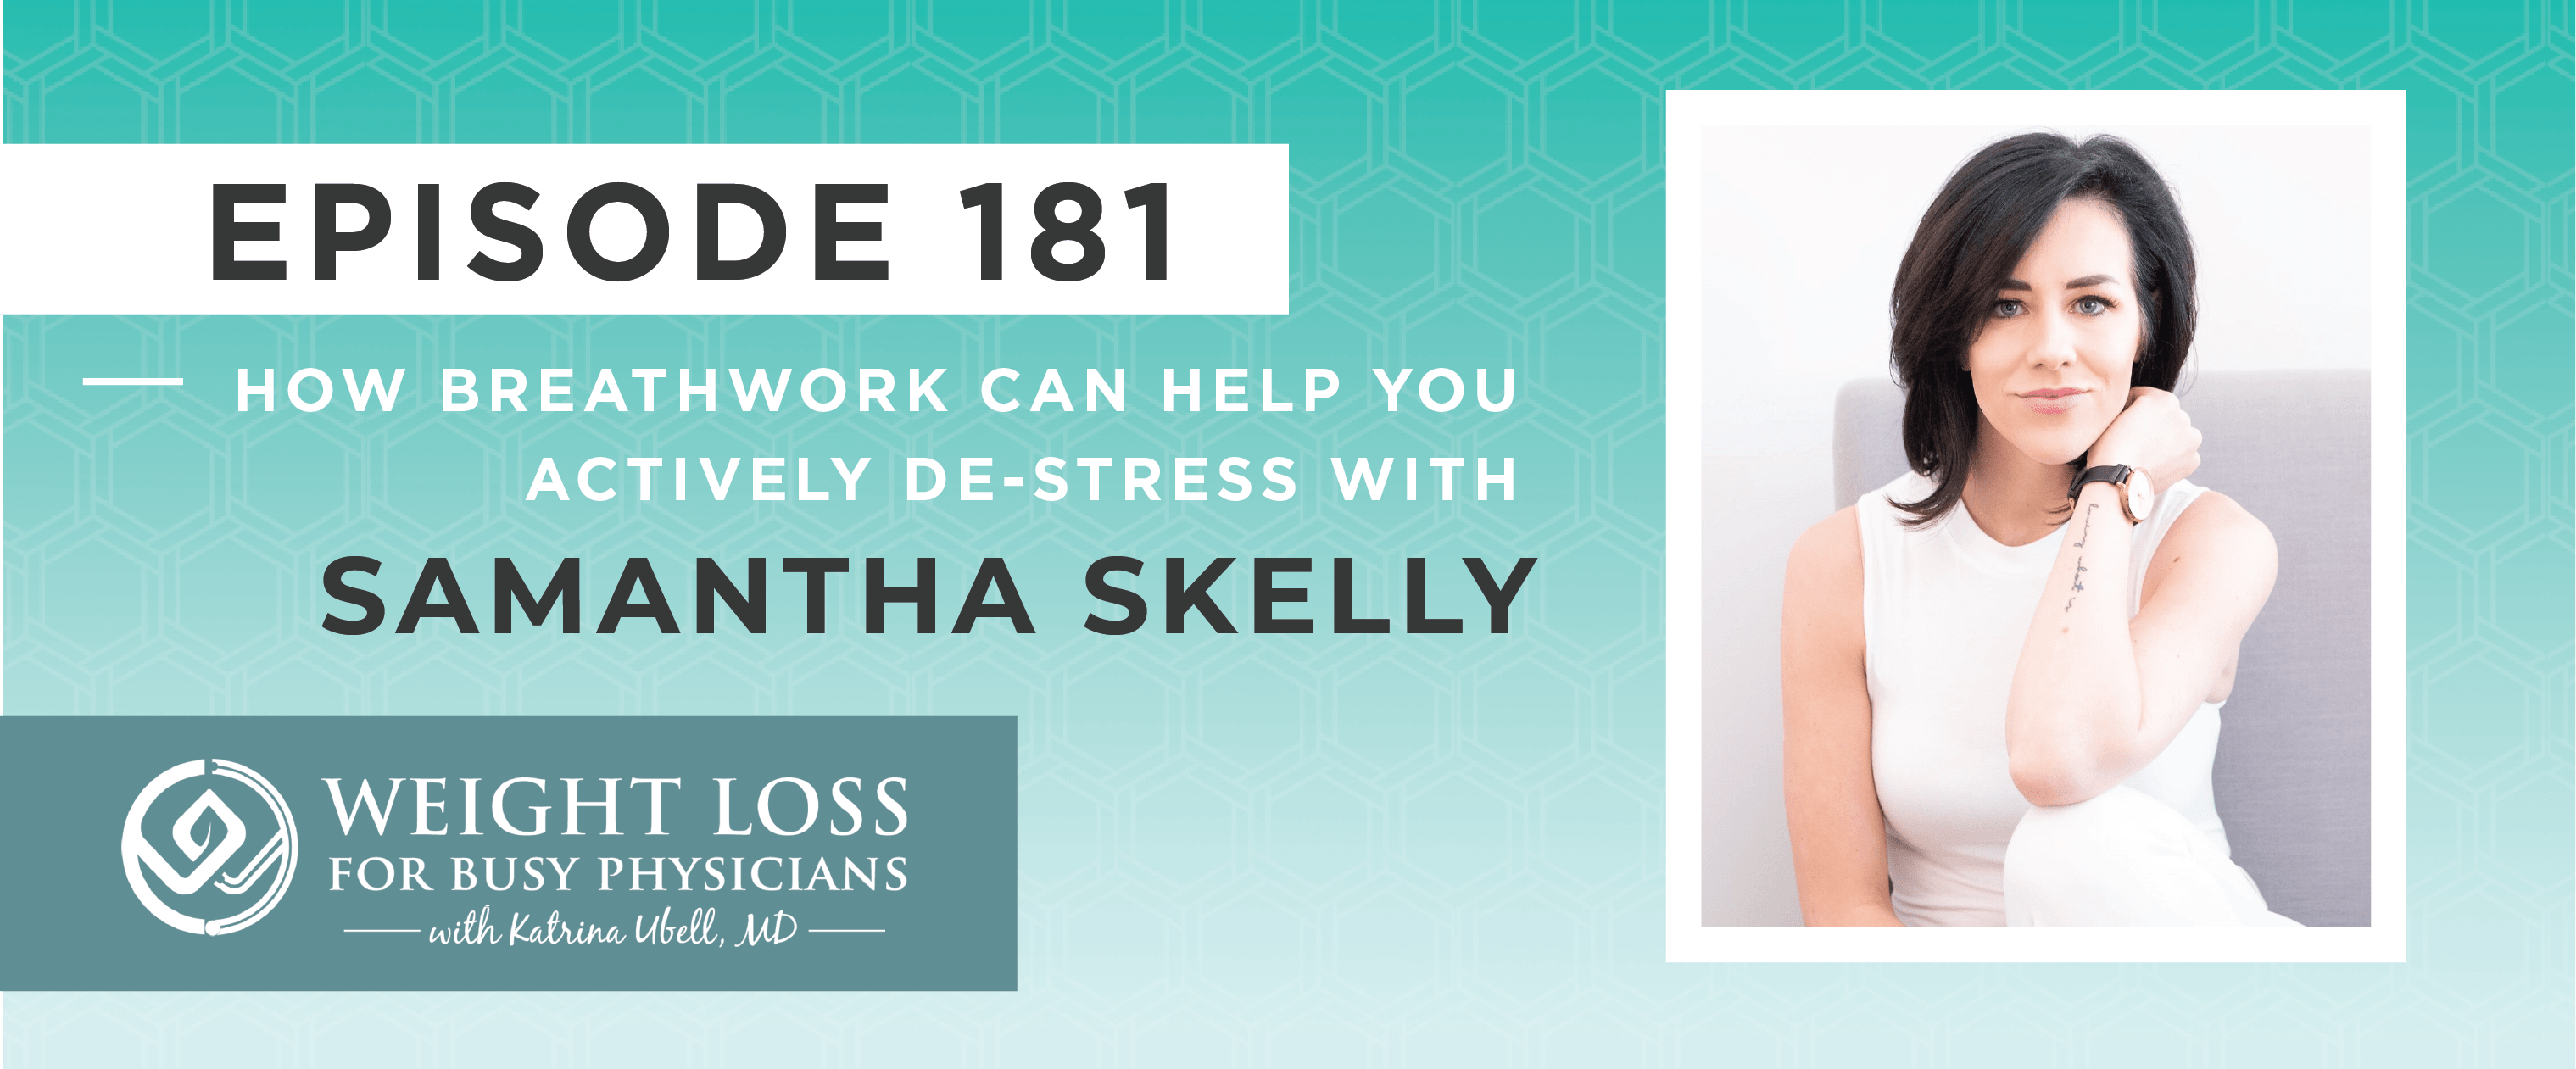 Ep #181: How Breathwork Can Help You Actively De-stress with Samantha Skelly